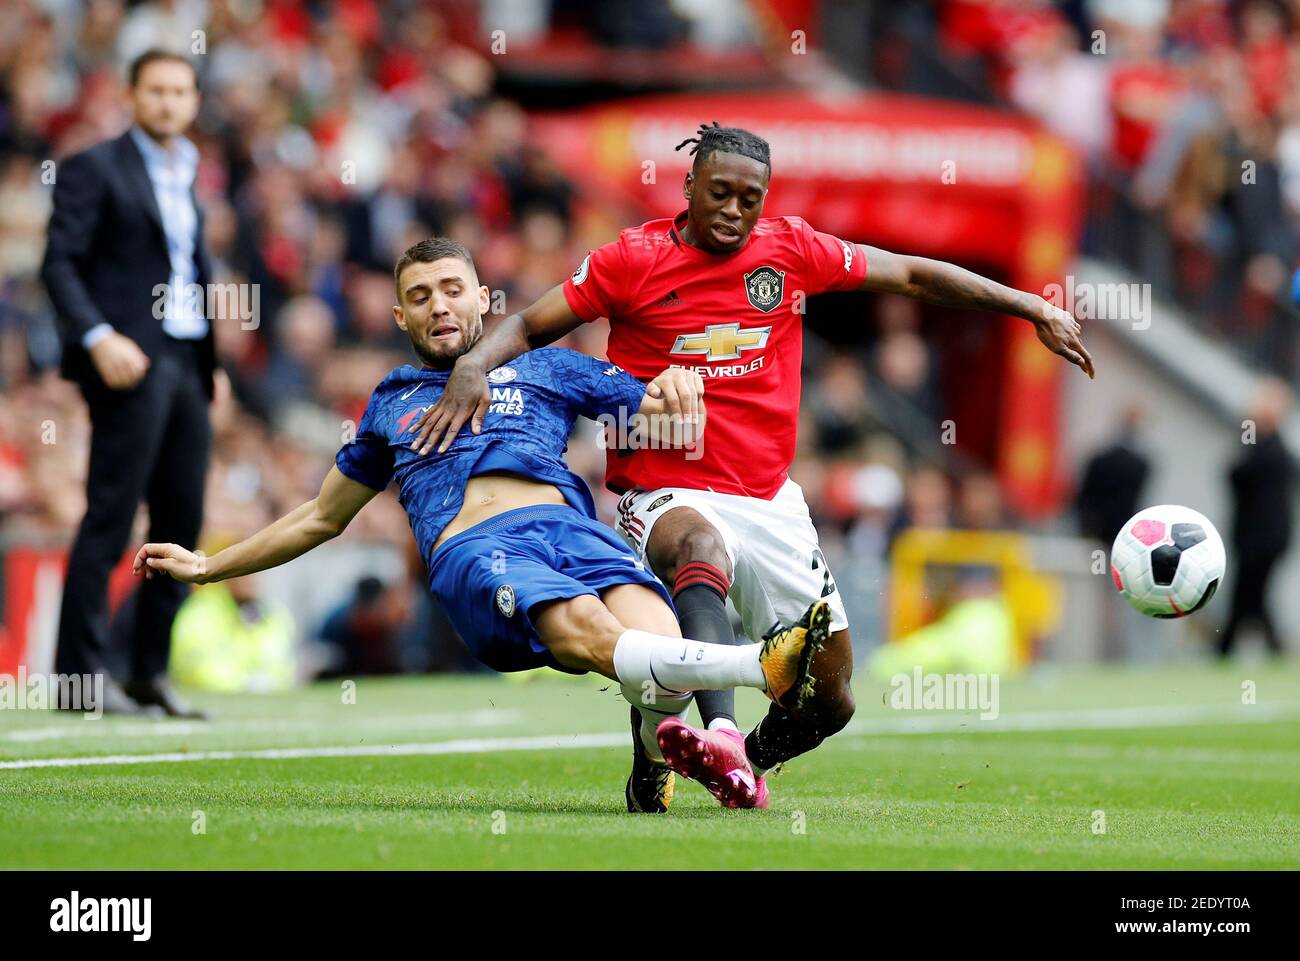 Soccer Football - Premier League - Manchester United v Chelsea - Old Trafford, Manchester, Britain - August 11, 2019  Manchester United's Aaron Wan-Bissaka in action with Chelsea's Mateo Kovacic   REUTERS/Phil Noble  EDITORIAL USE ONLY. No use with unauthorized audio, video, data, fixture lists, club/league logos or 'live' services. Online in-match use limited to 75 images, no video emulation. No use in betting, games or single club/league/player publications.  Please contact your account representative for further details. Stock Photo